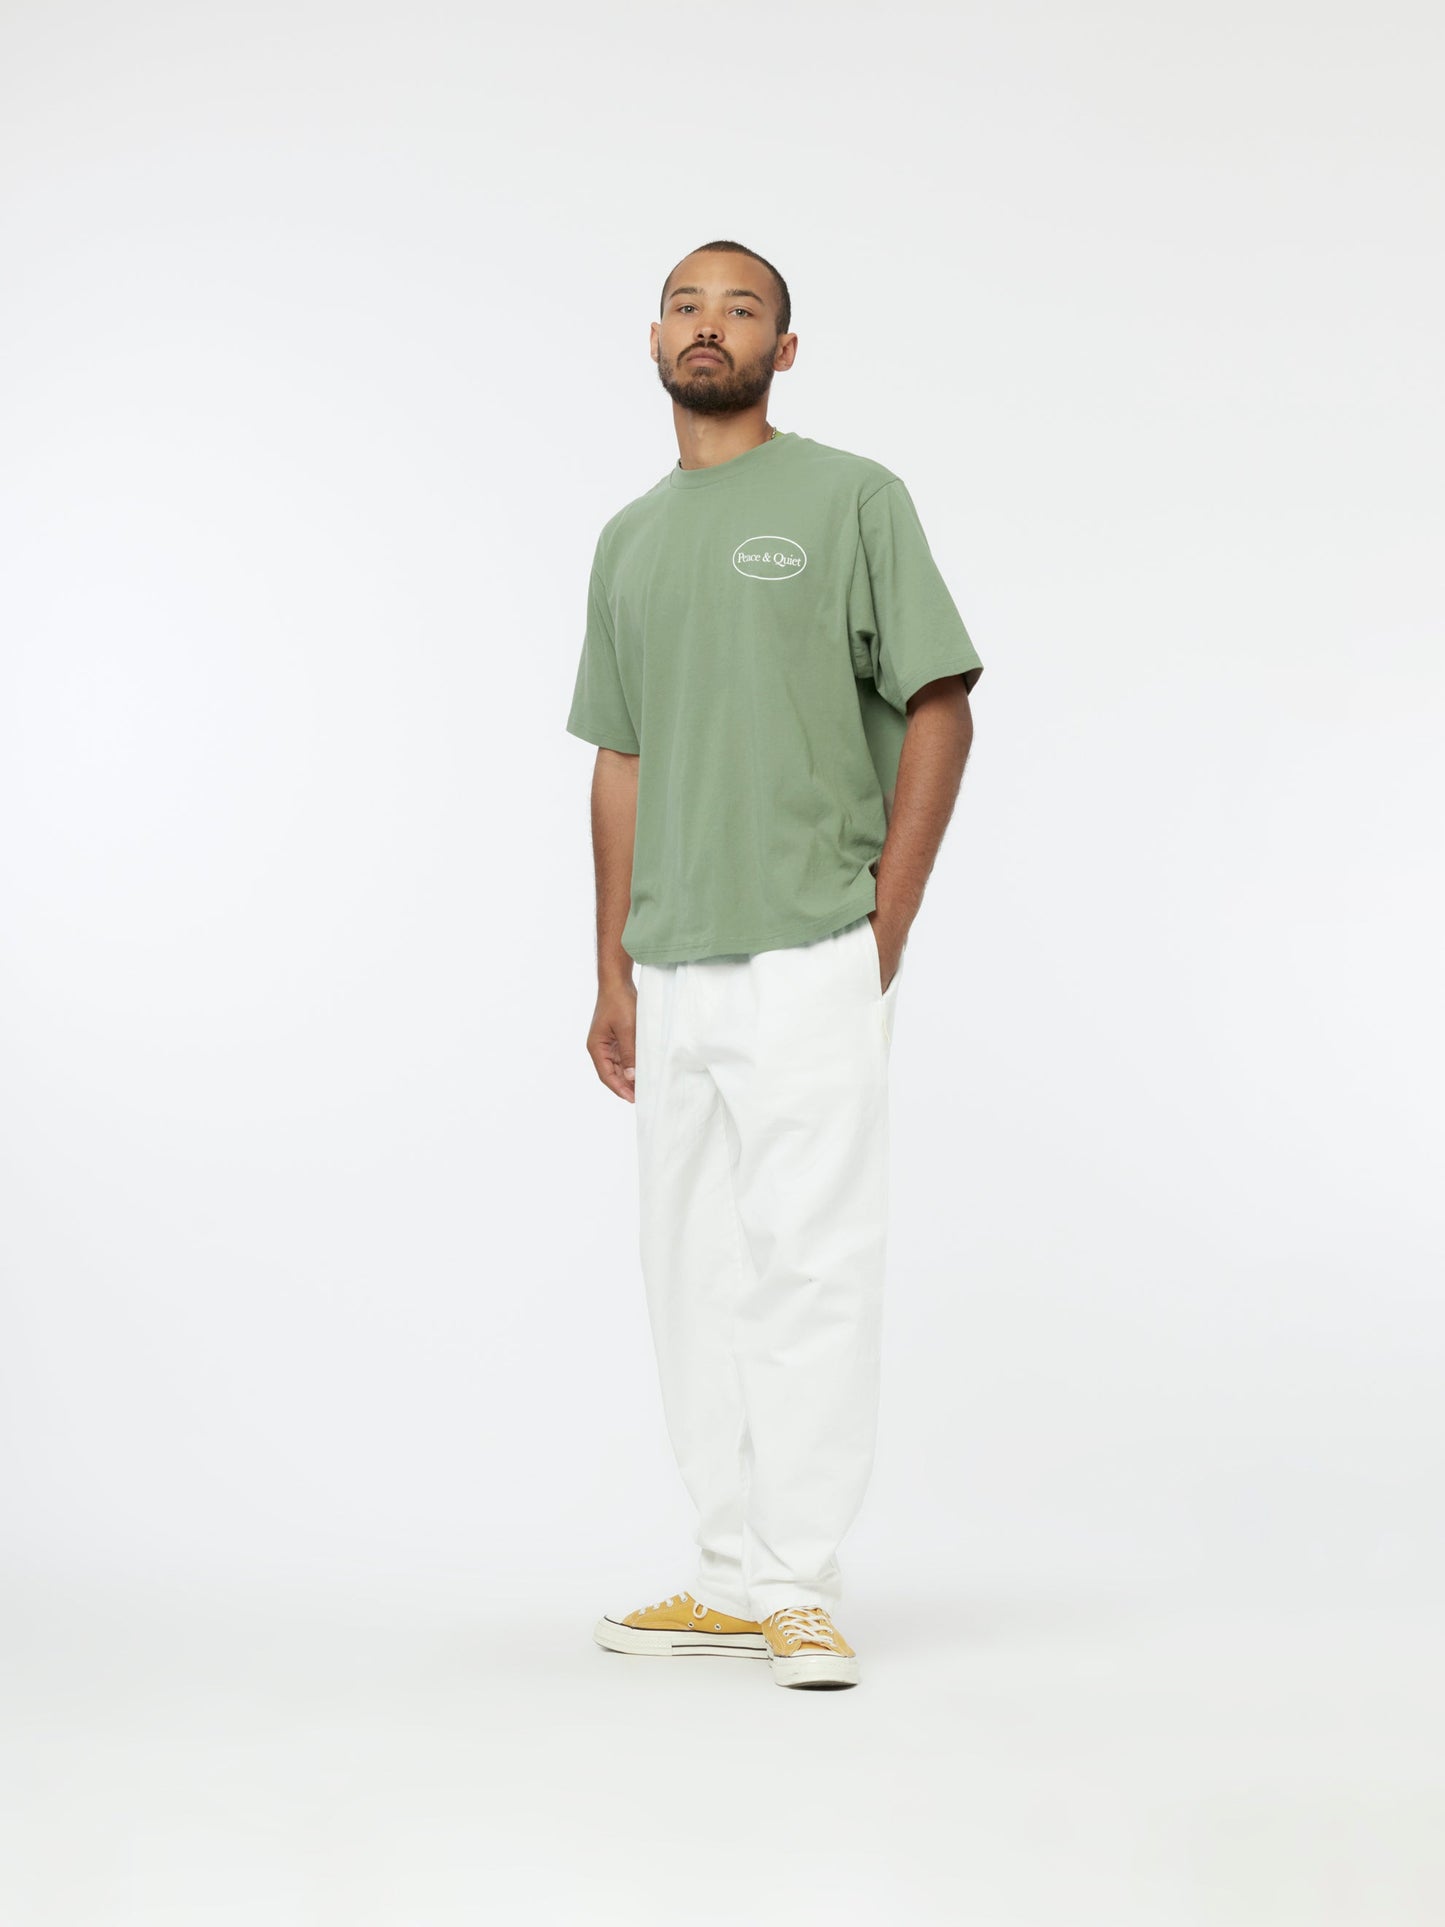 Museum Hours T-Shirt (Olive)